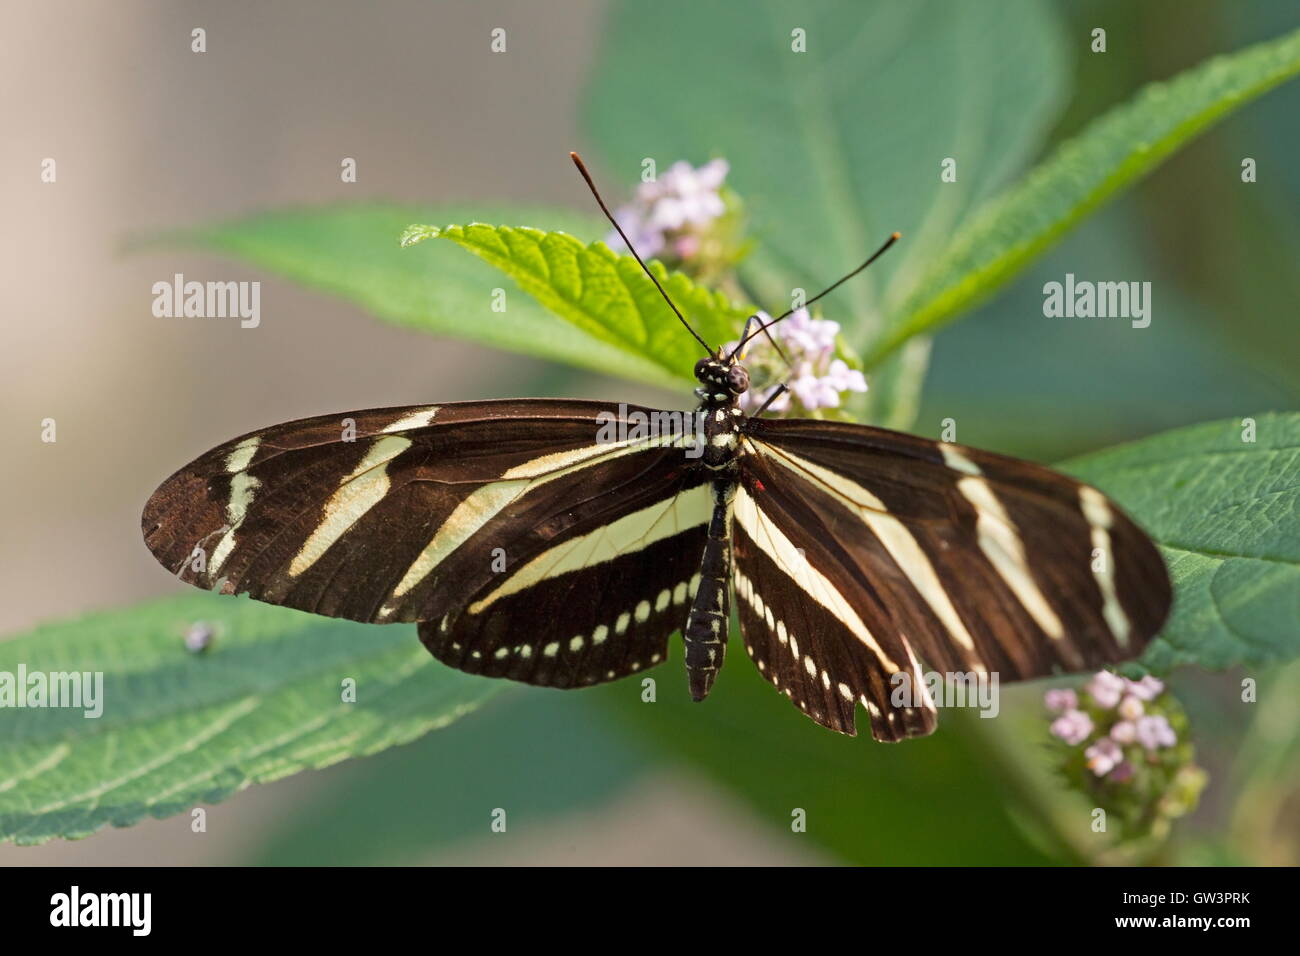 Passionflower butterfly sits on a plant, Netherlands Stock Photo